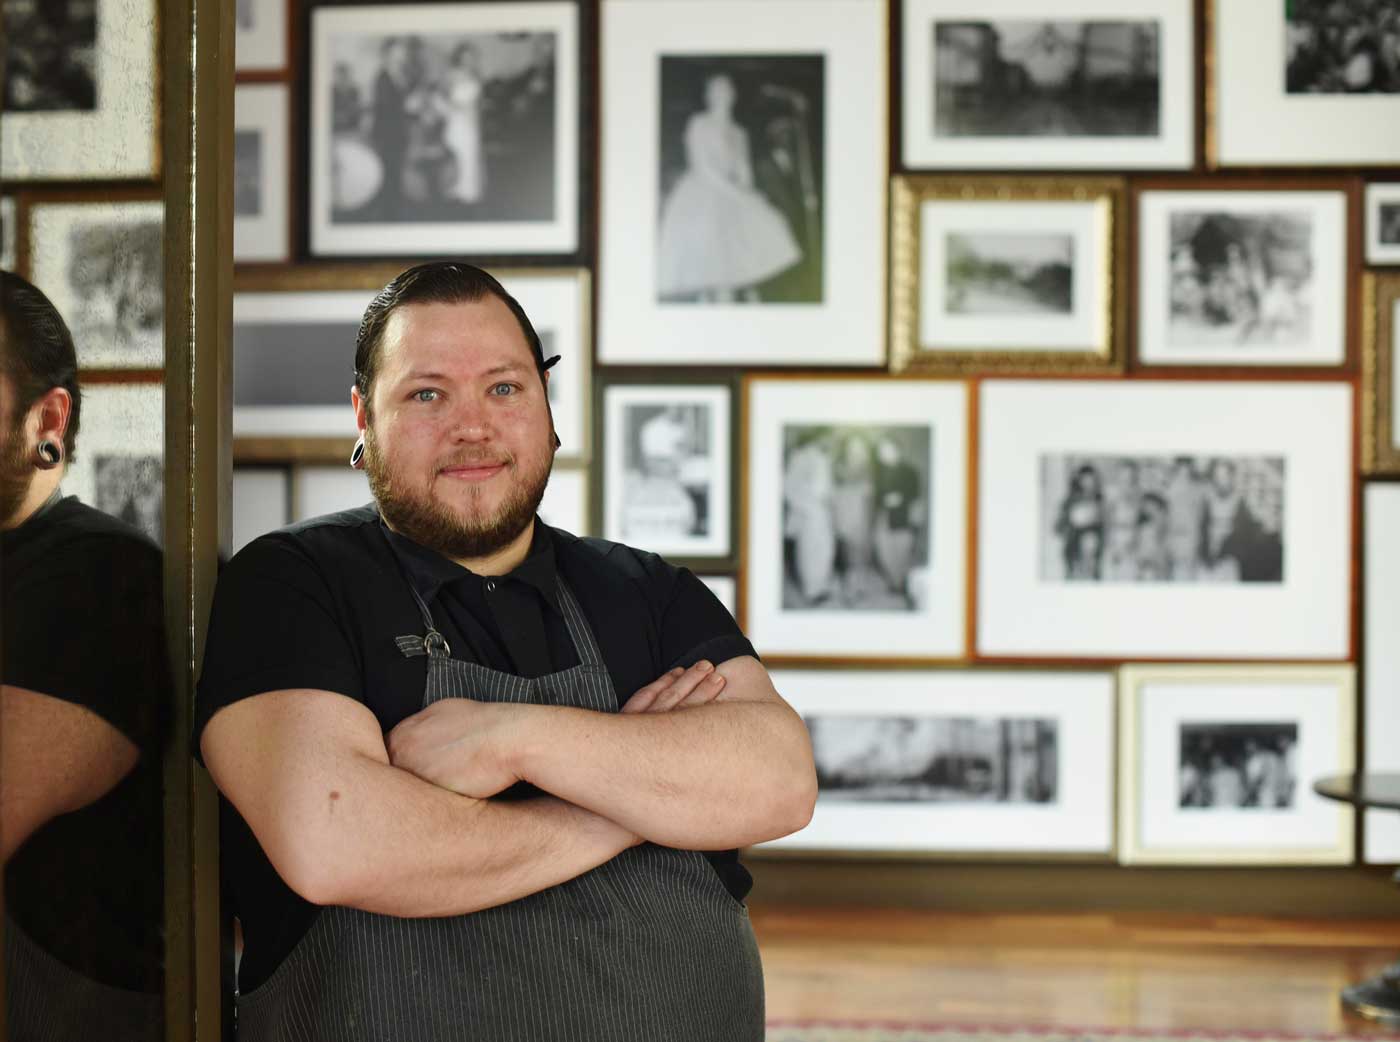 Chef Jake, who grew up in the central valley of California, has earned kudos from restaurant critics for maintaing the menu and feel of the restaurant, while chef David focuses on Black Bark BBQ.